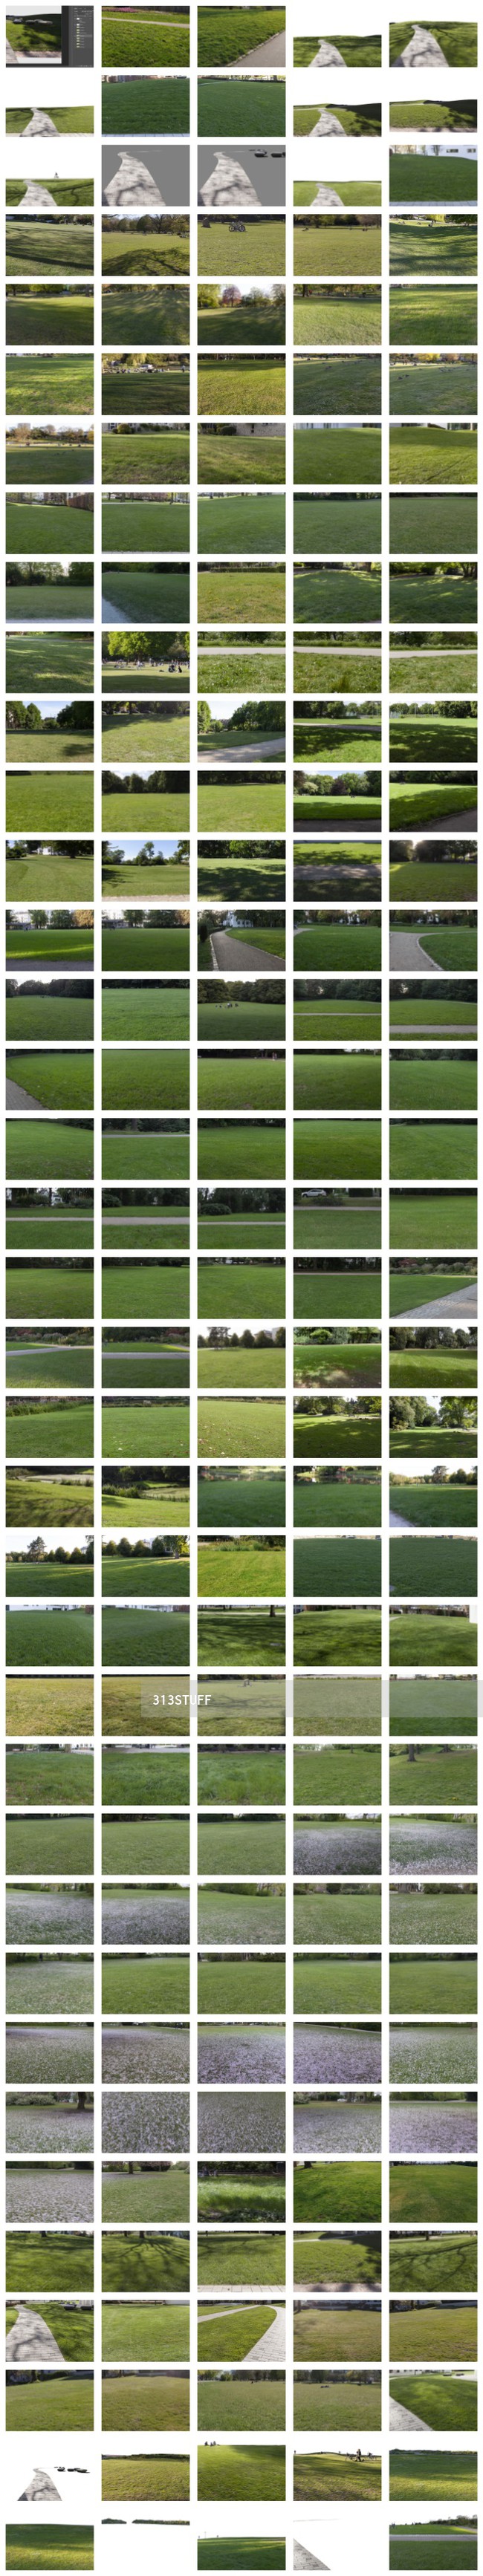 Lawn grass collection 01